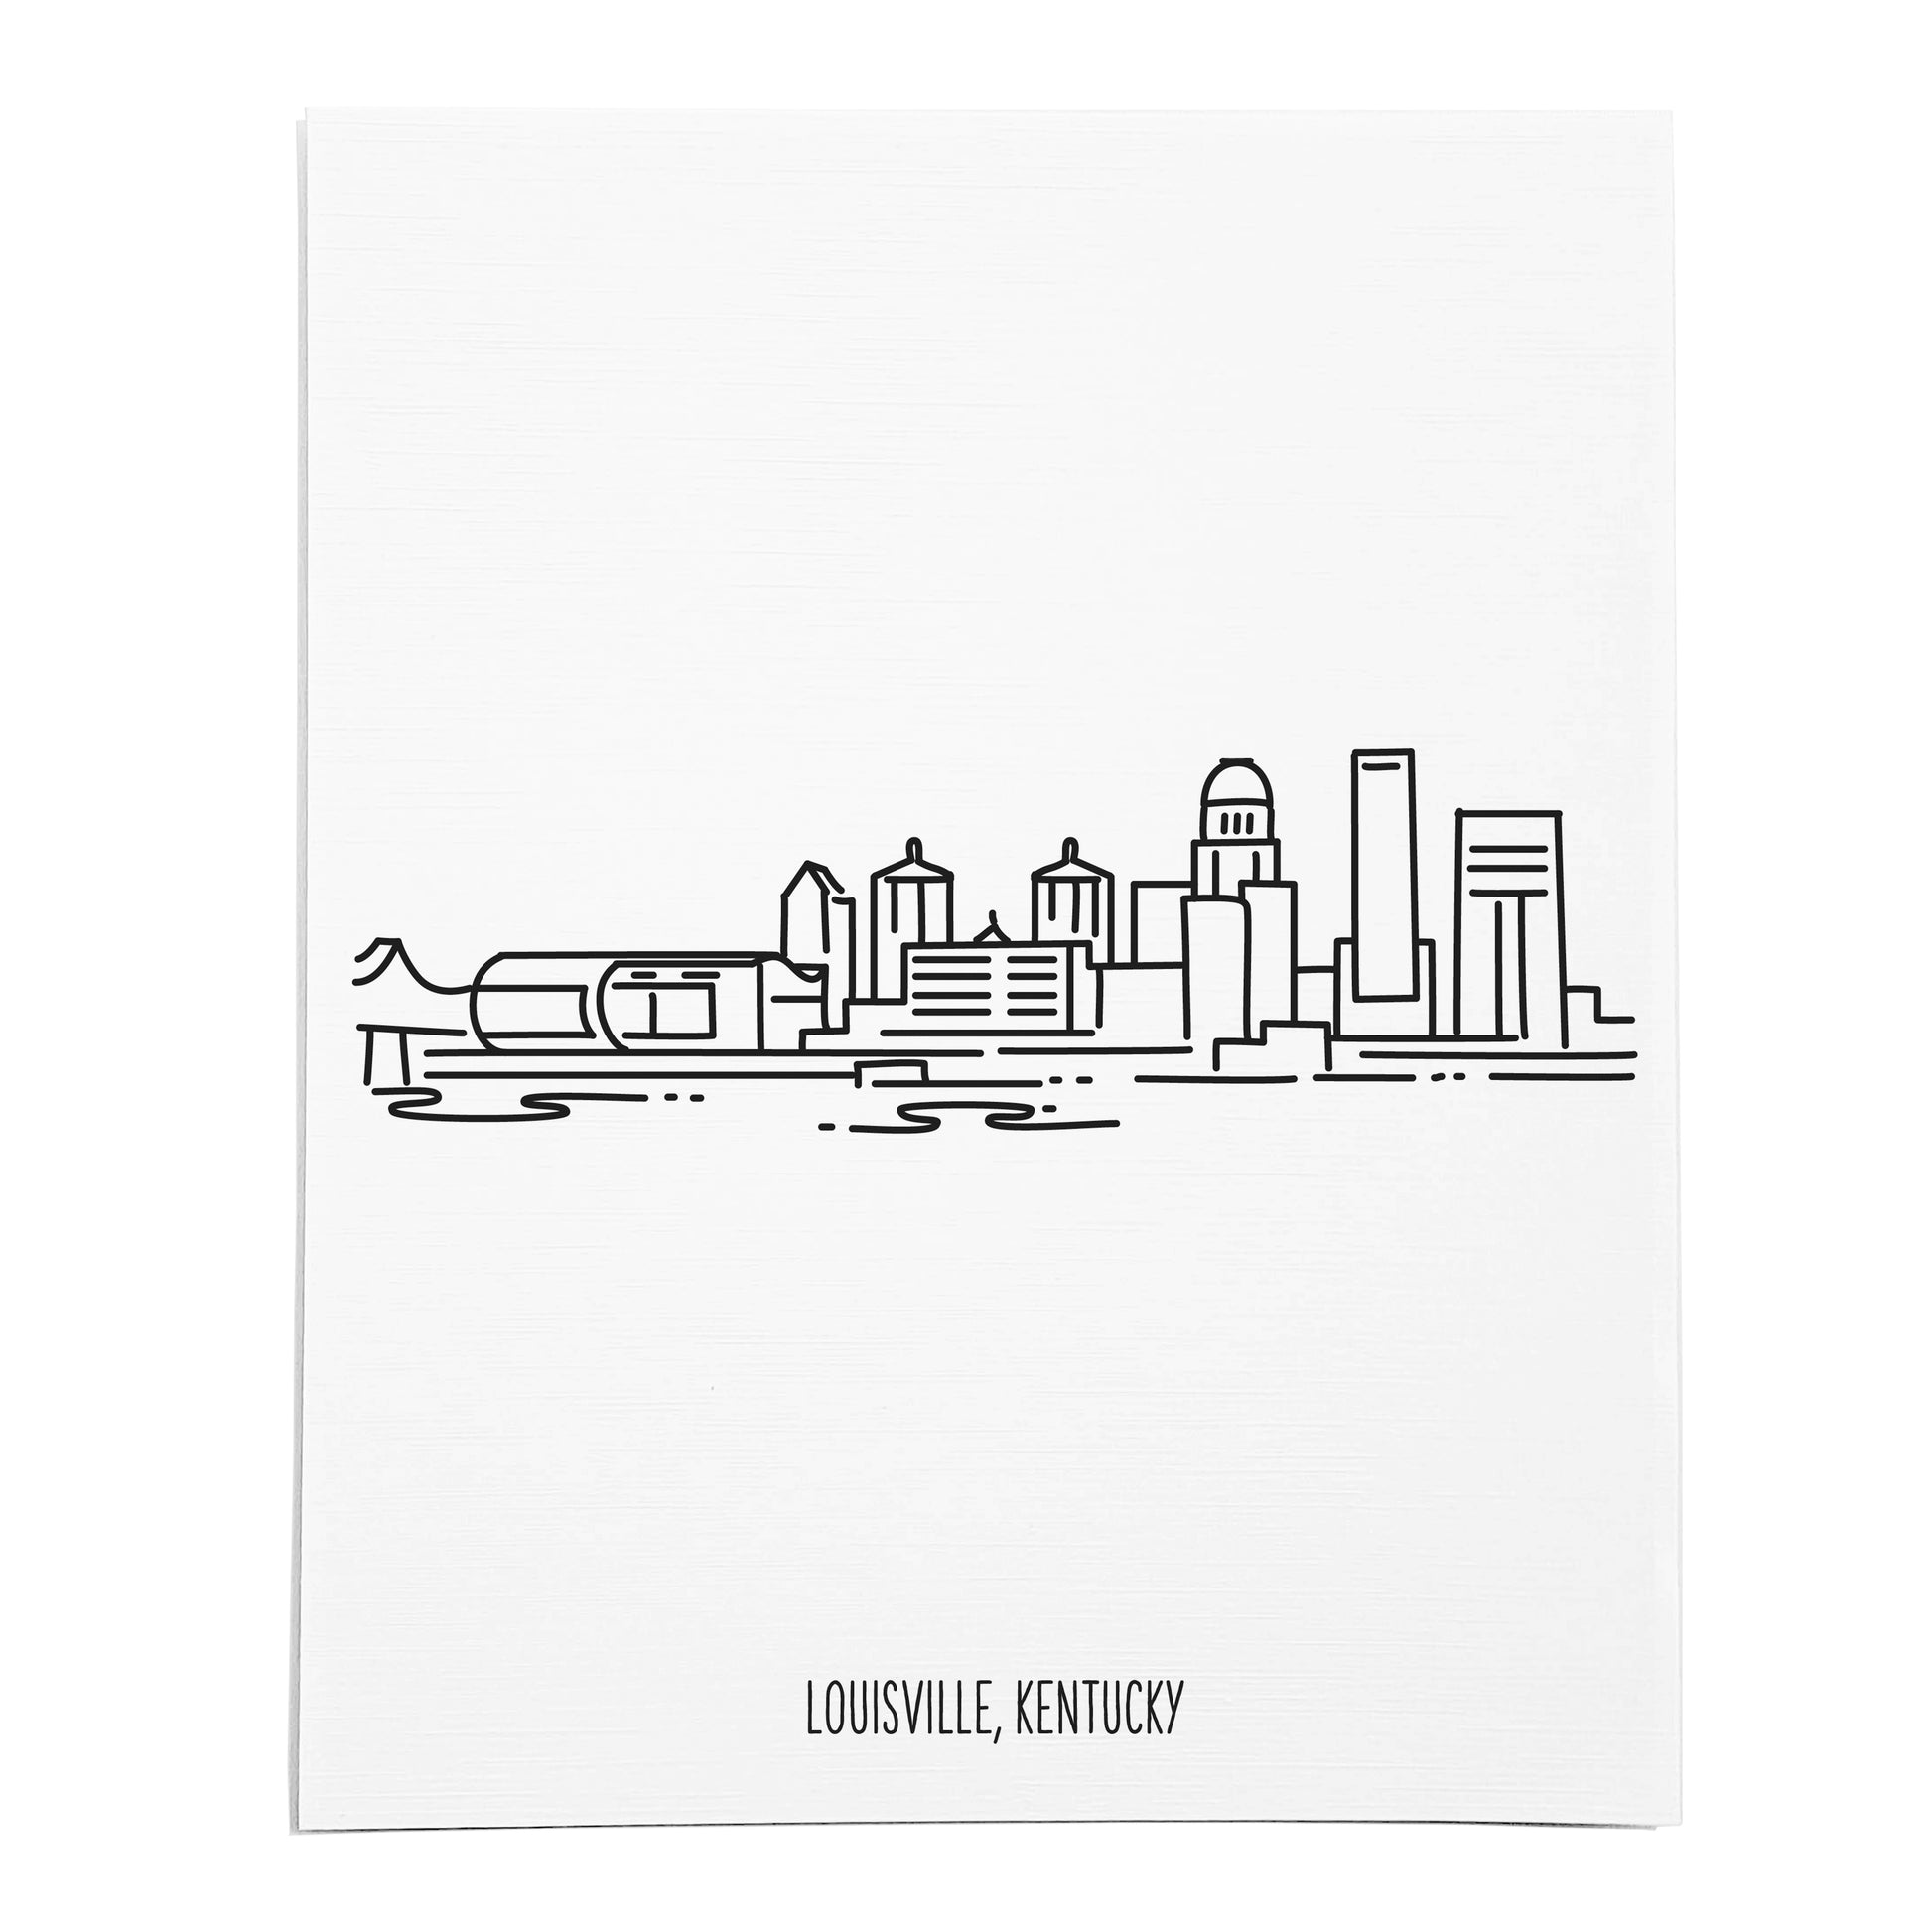 An art print featuring a line drawing of the Louisville Skyline on white linen paper